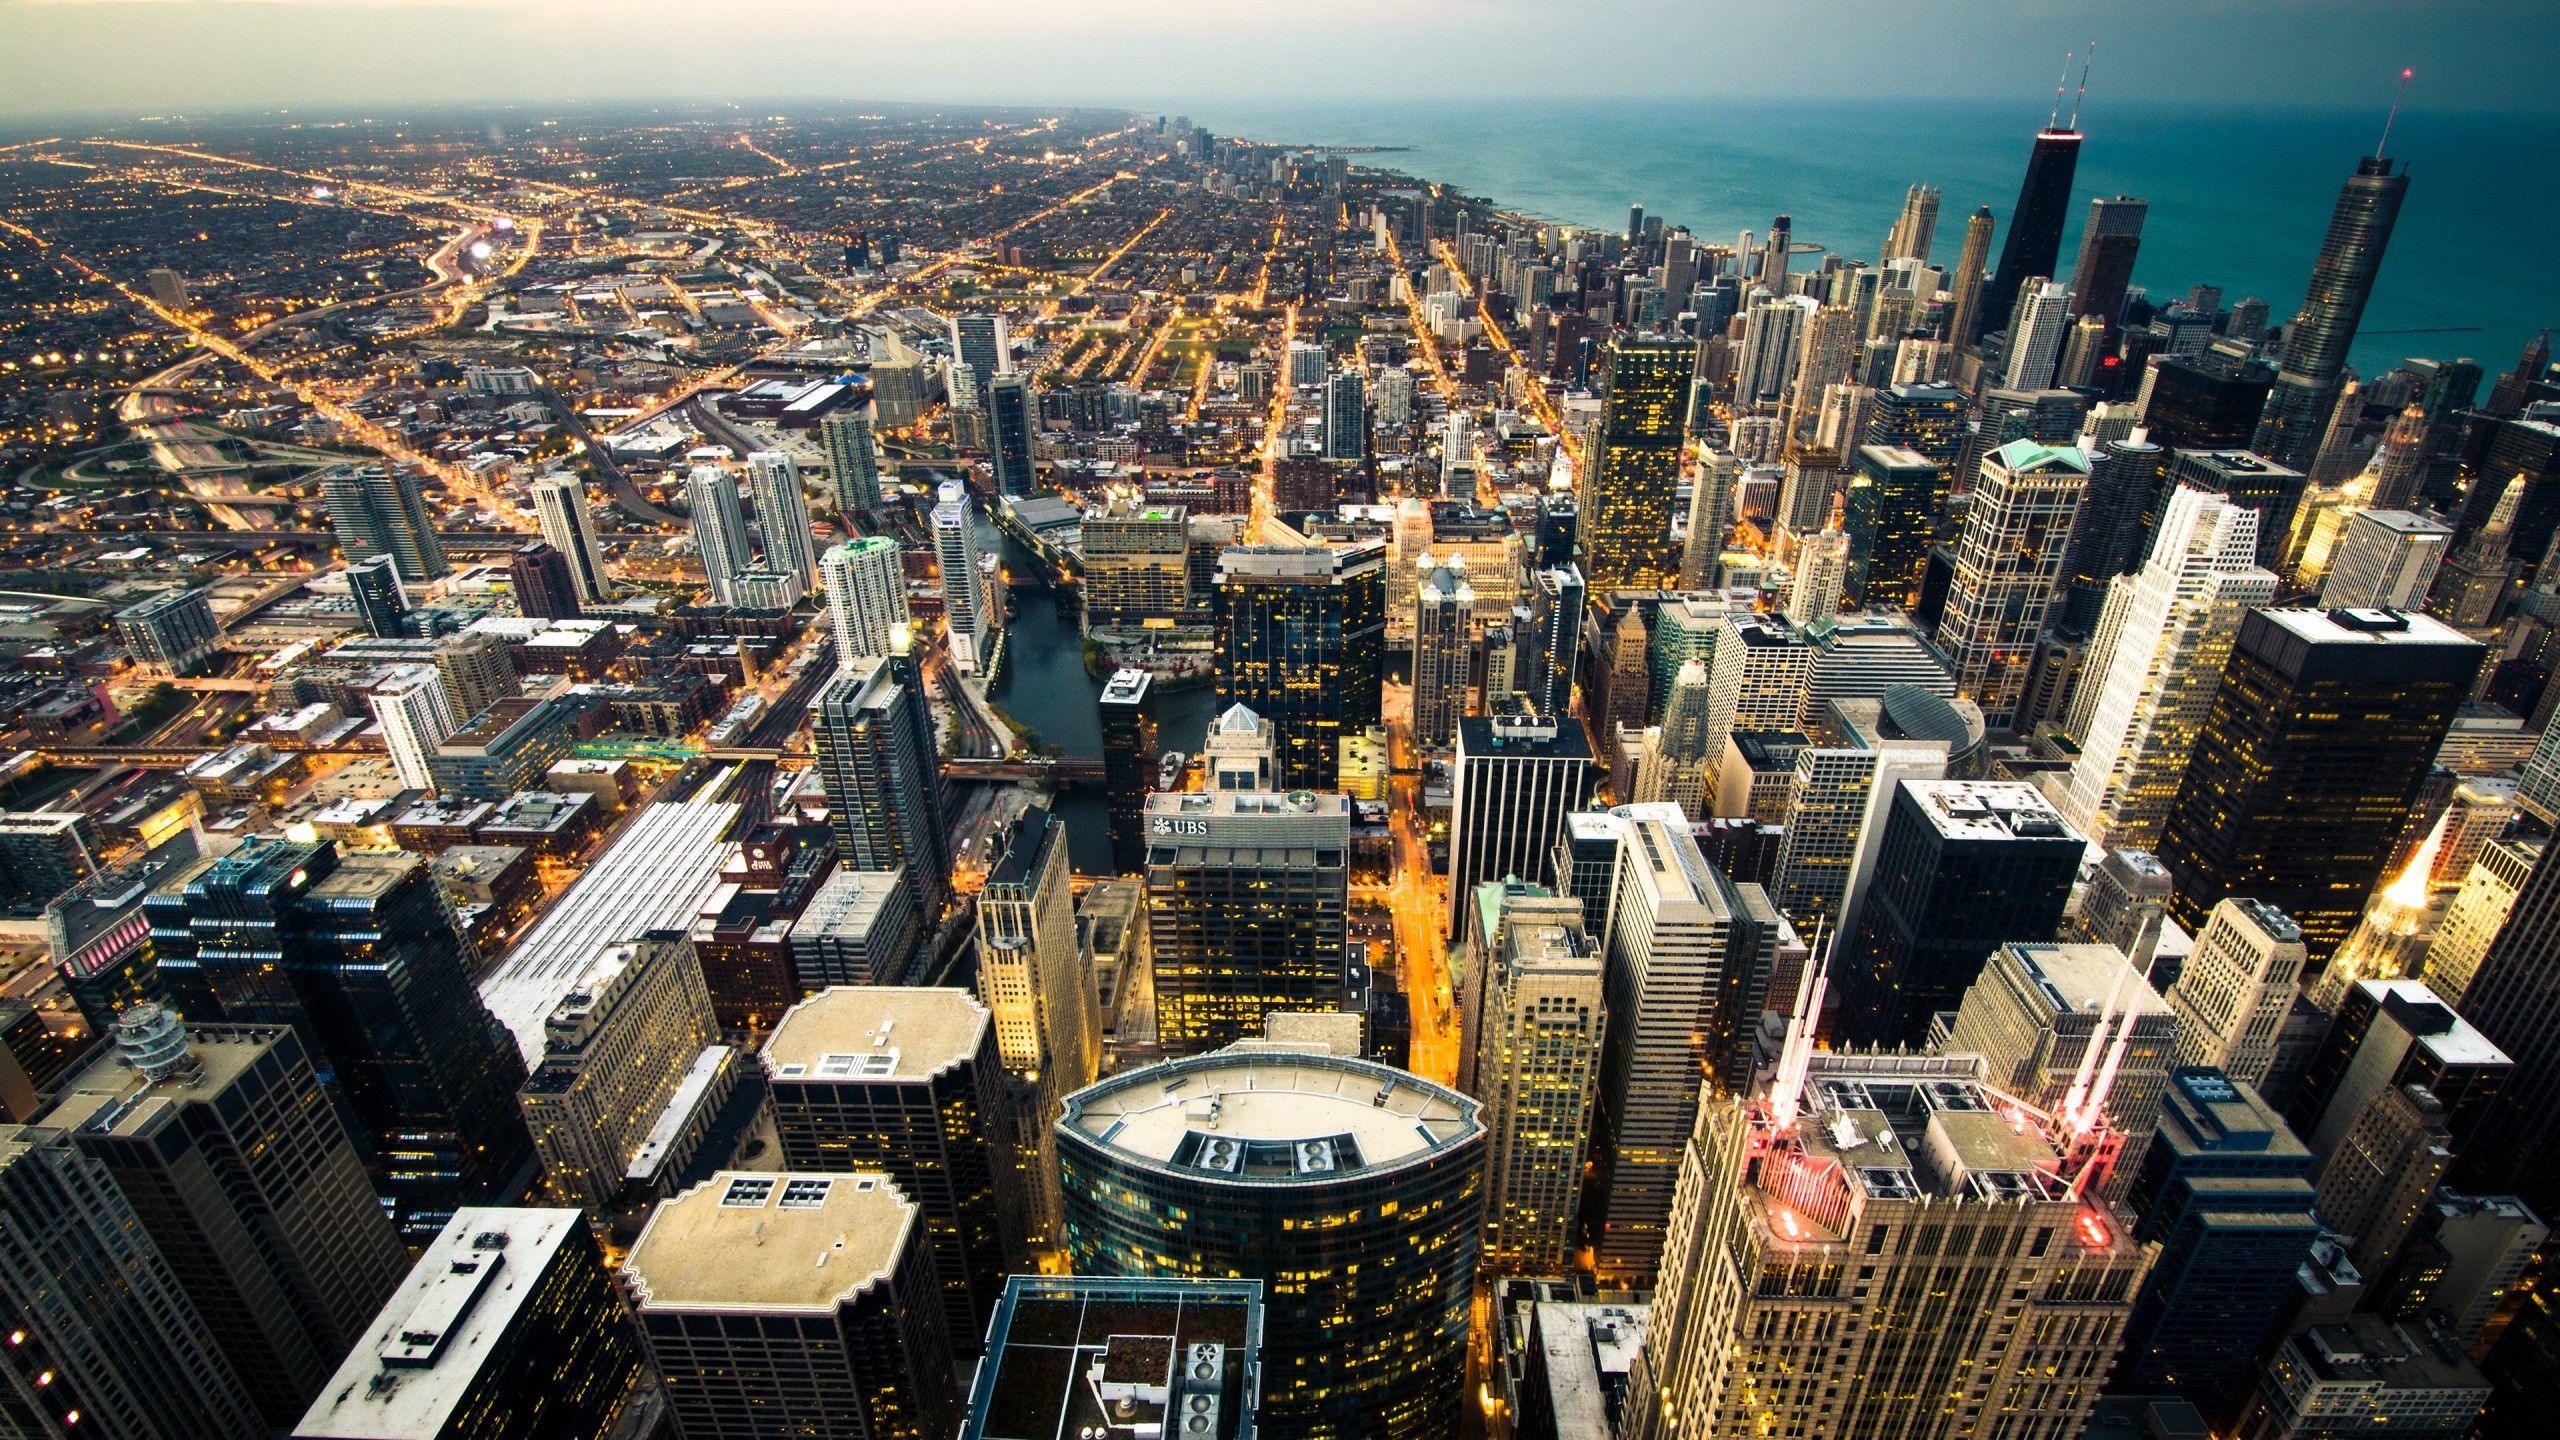 The city of Chicago, USA wallpaper and image